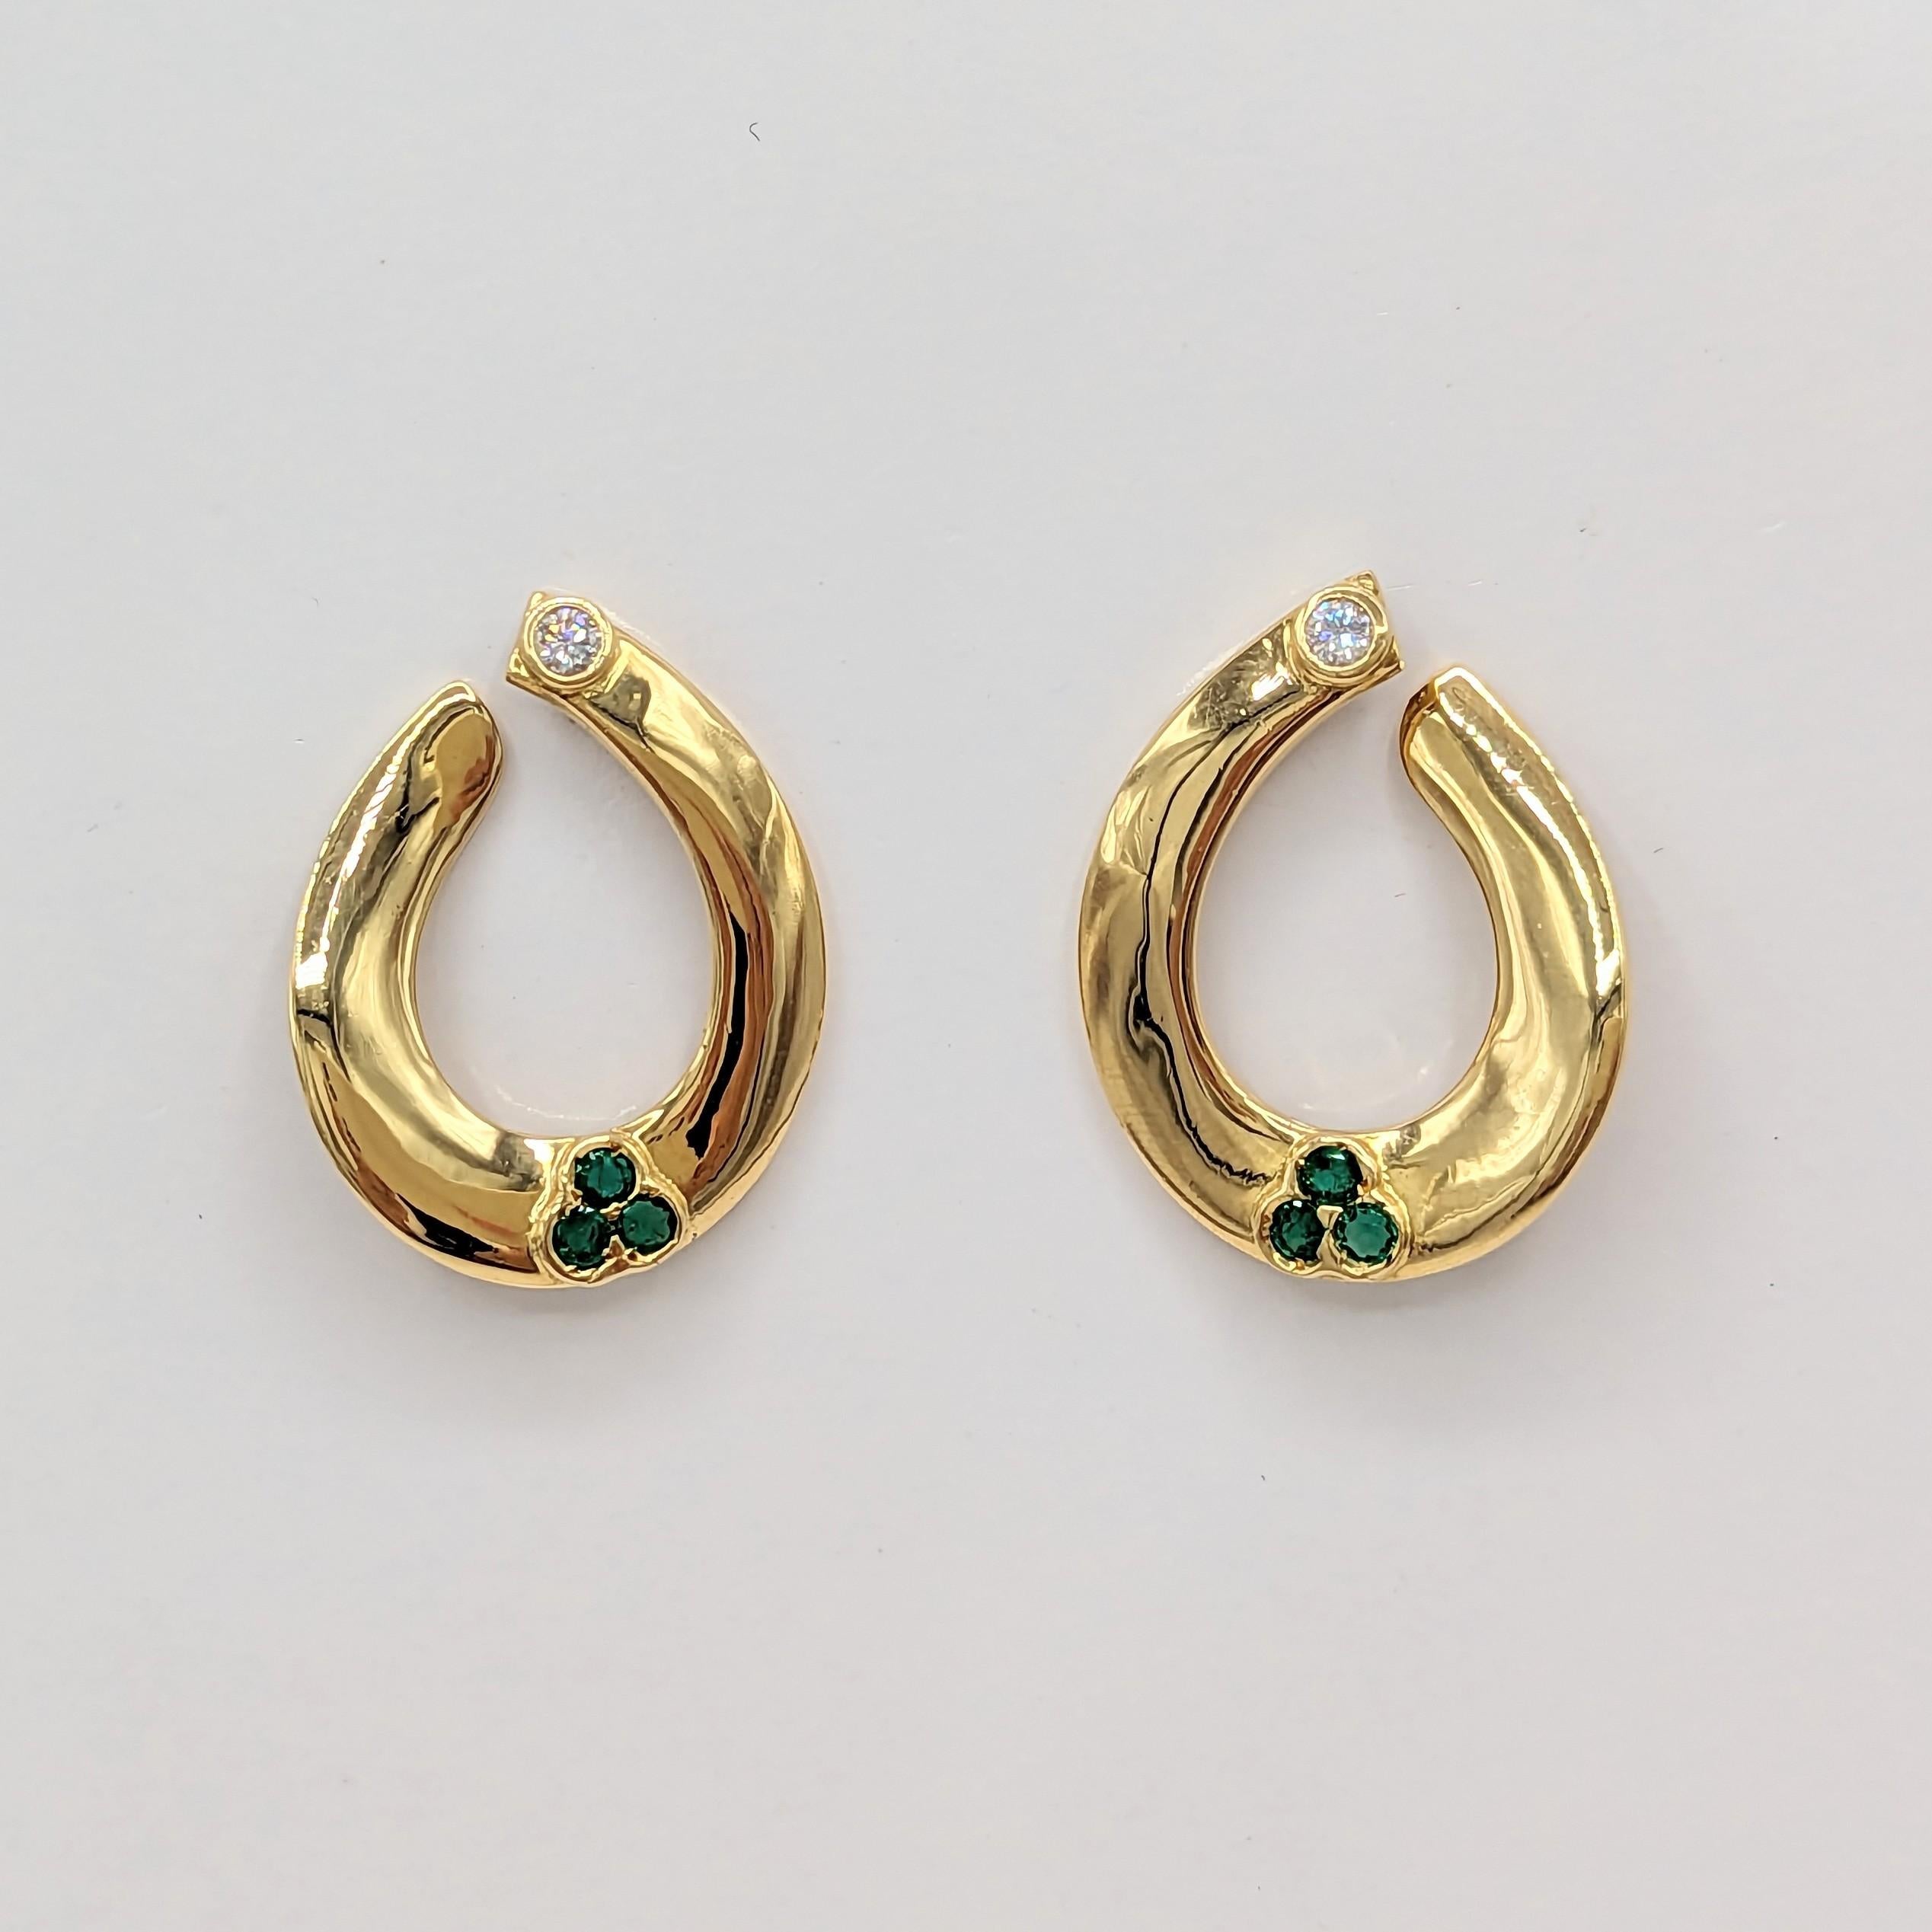 Round Cut White Diamond and Emerald Hoop Earrings in 18K Yellow Gold